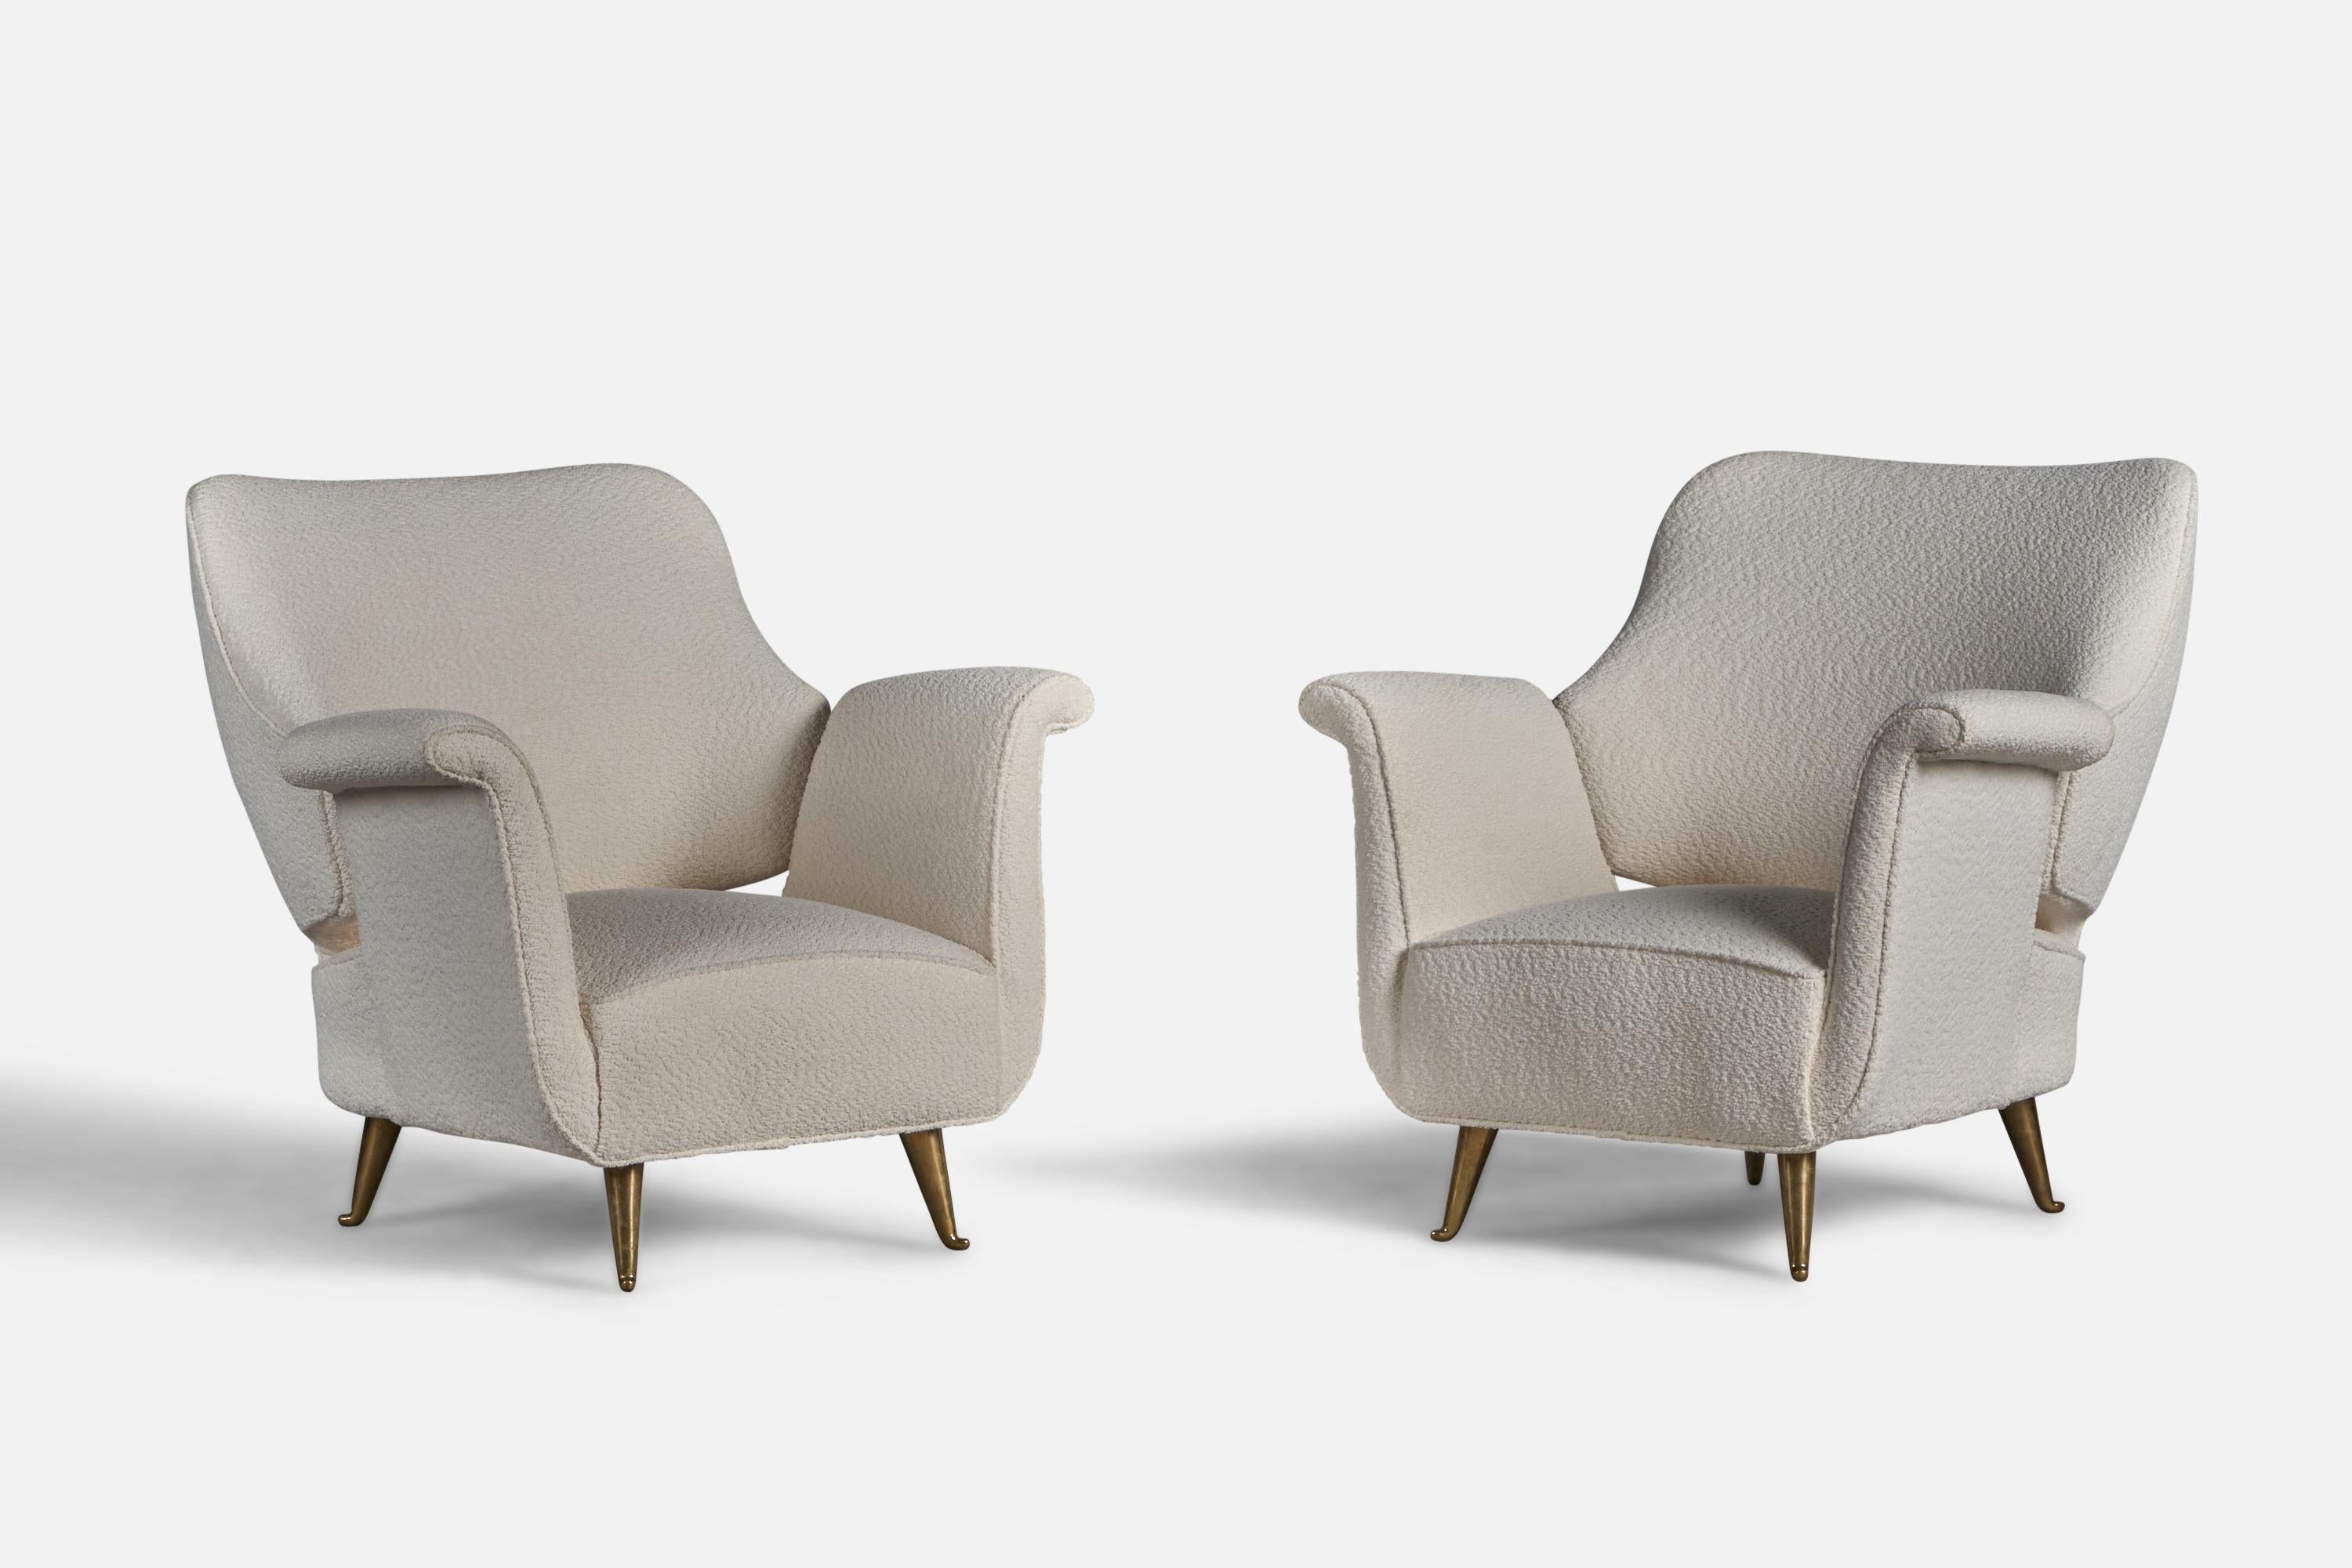 A pair of brass and white bouclé fabric lounge chairs, designed and produced by ISA Bergamo, Italy, 1950s.

13.5” seat height